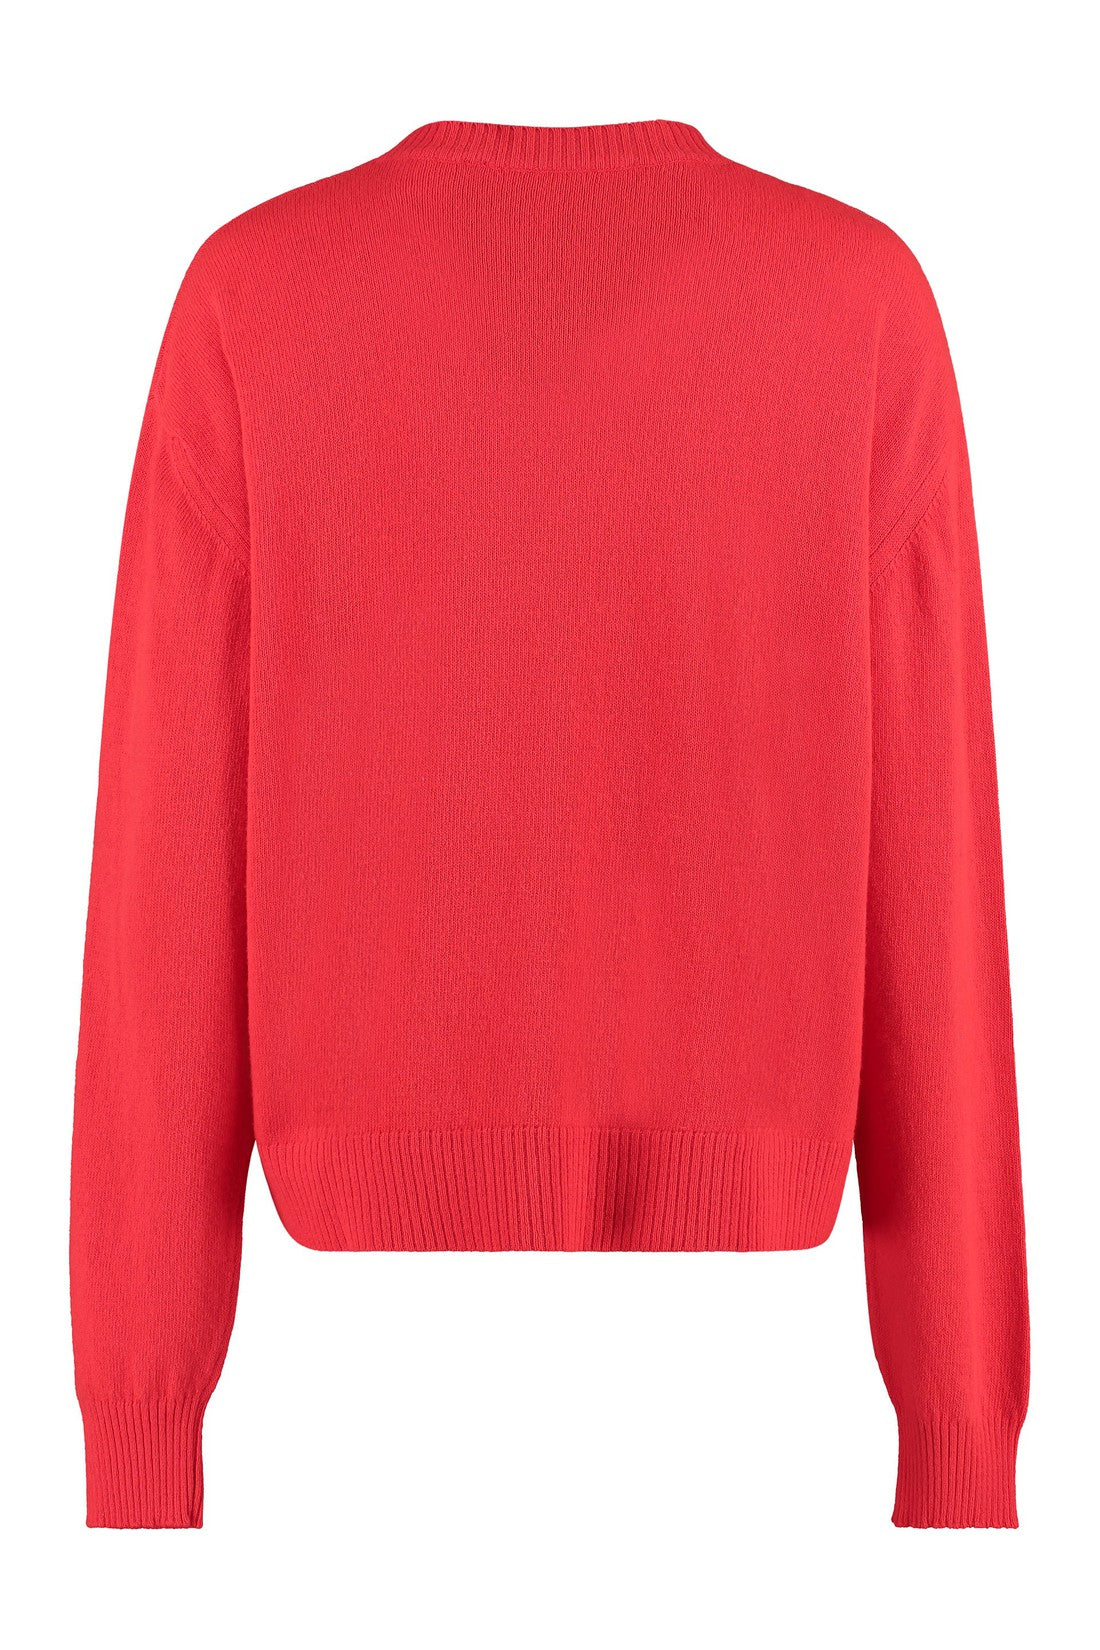 Philosophy di Lorenzo Serafini-OUTLET-SALE-Philosophy x Peanuts™- Wool and cashmere sweater-ARCHIVIST